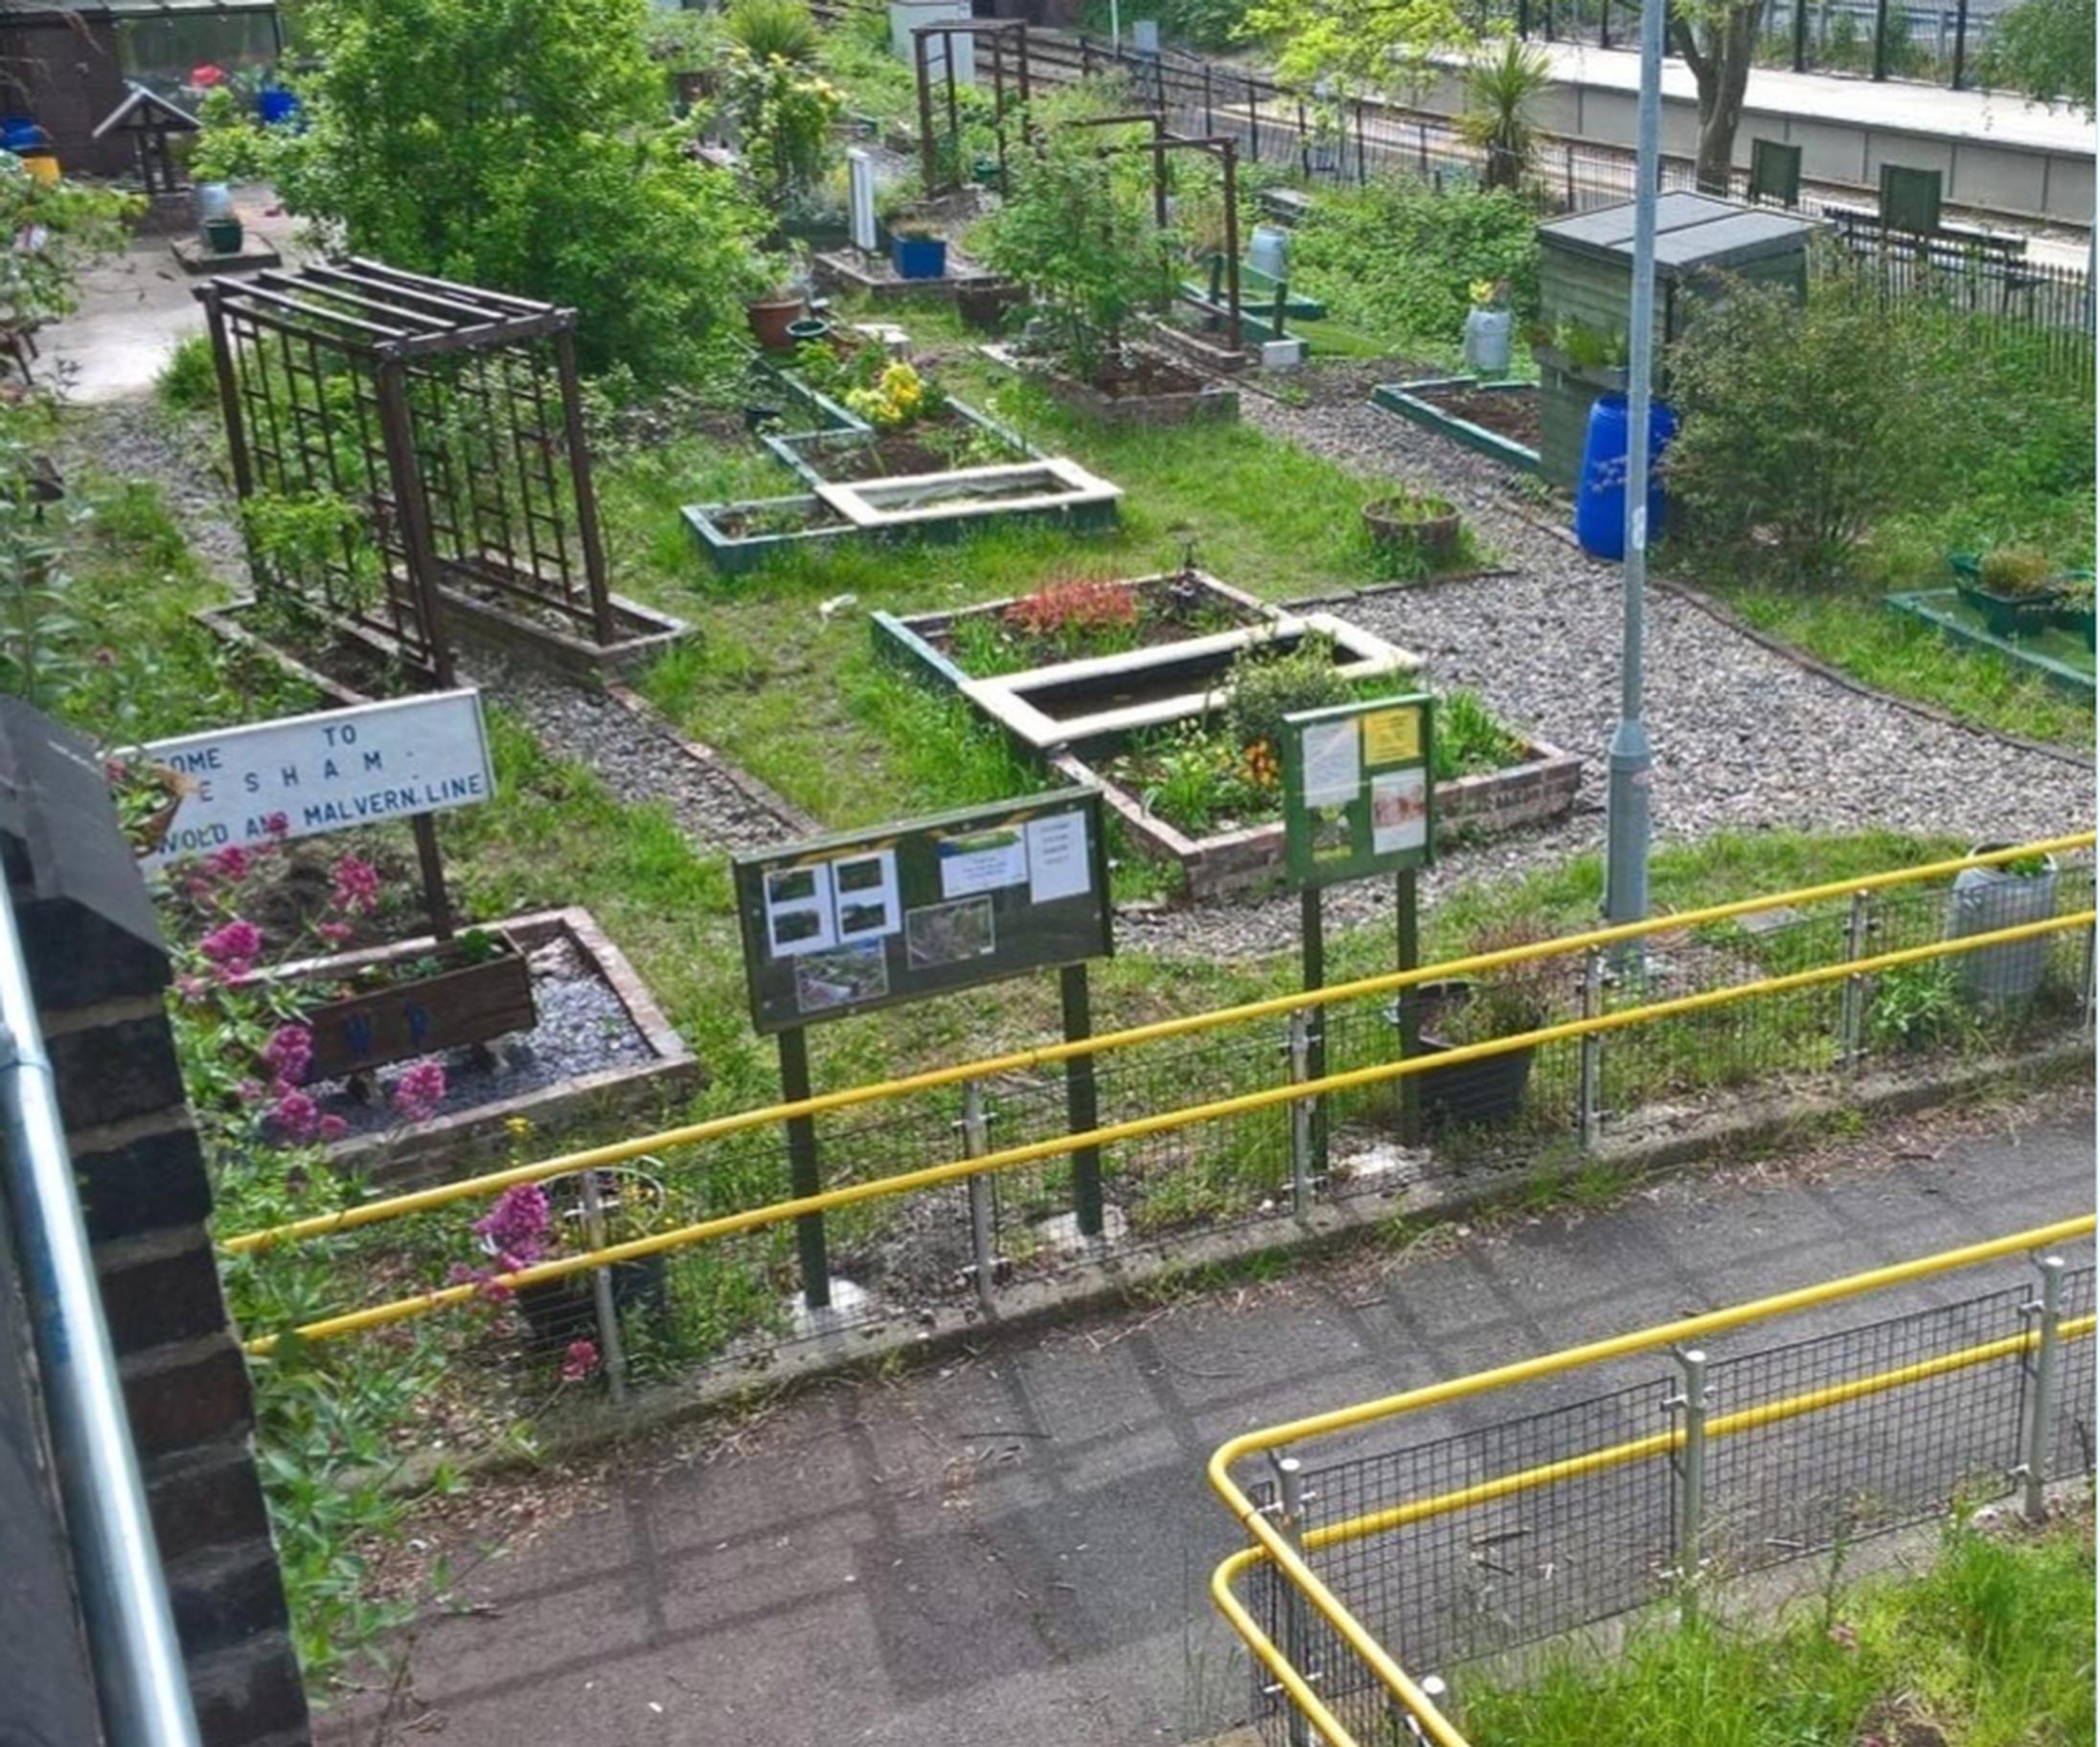 The Evesham Station Garden Project: A team of ‘station adopters’ have transformed what was an overgrown and neglected area